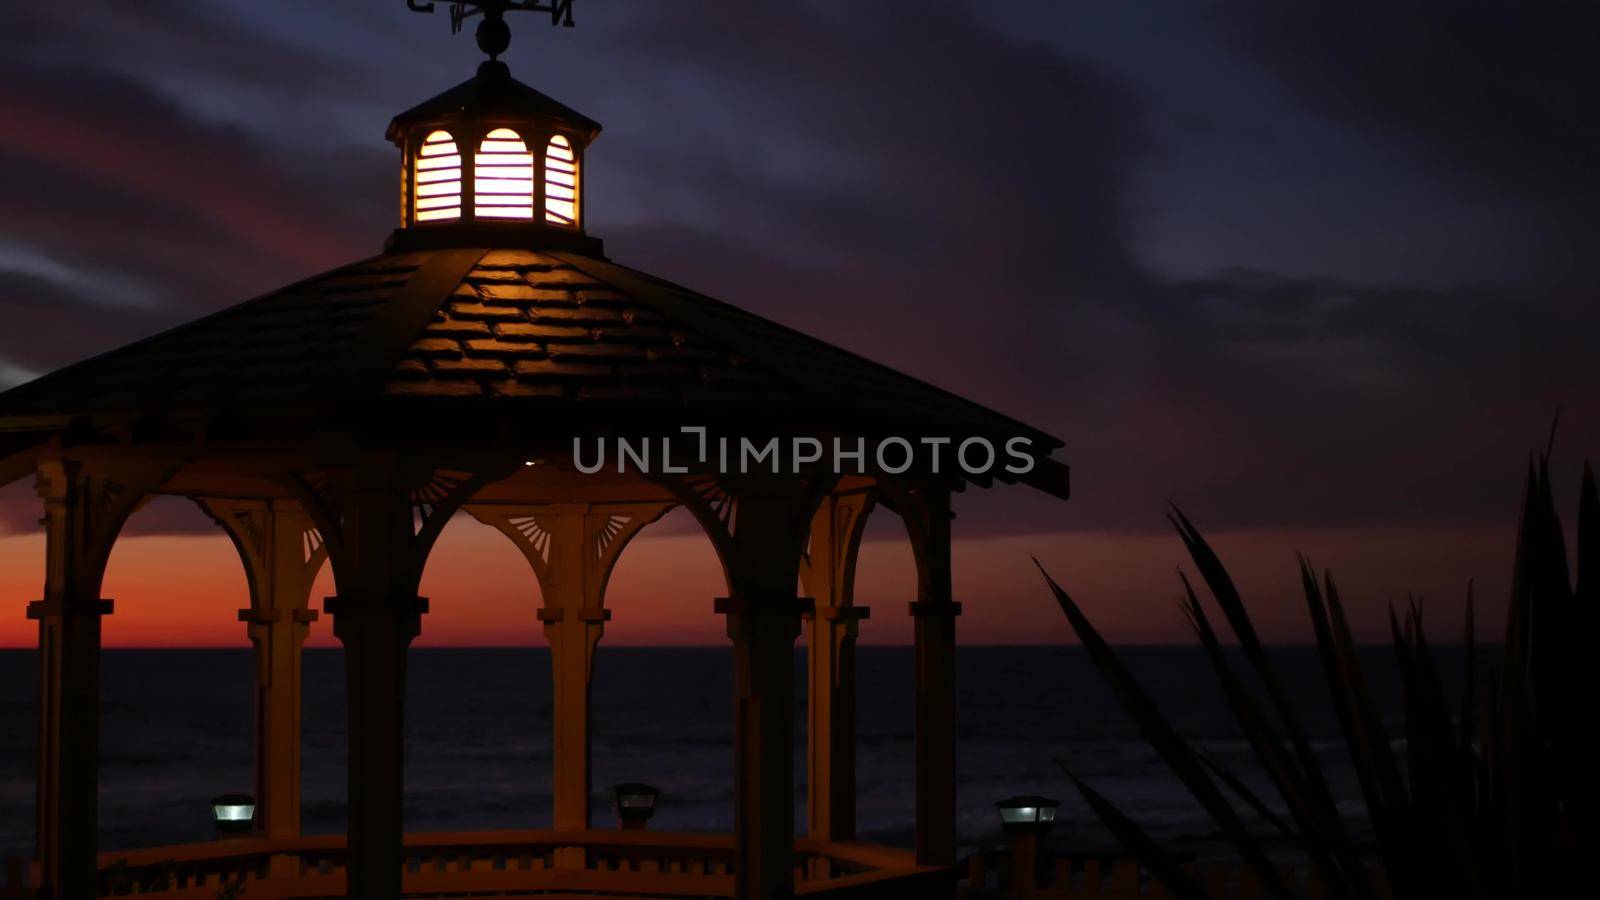 Sunset cloudscape and gazebo silhouette on beach, twilight dusk, clouds in dramatic purple pink sky, California coast. Wooden romantic cosy alcove and palm tree. Weather wind vane or roof weathercock.